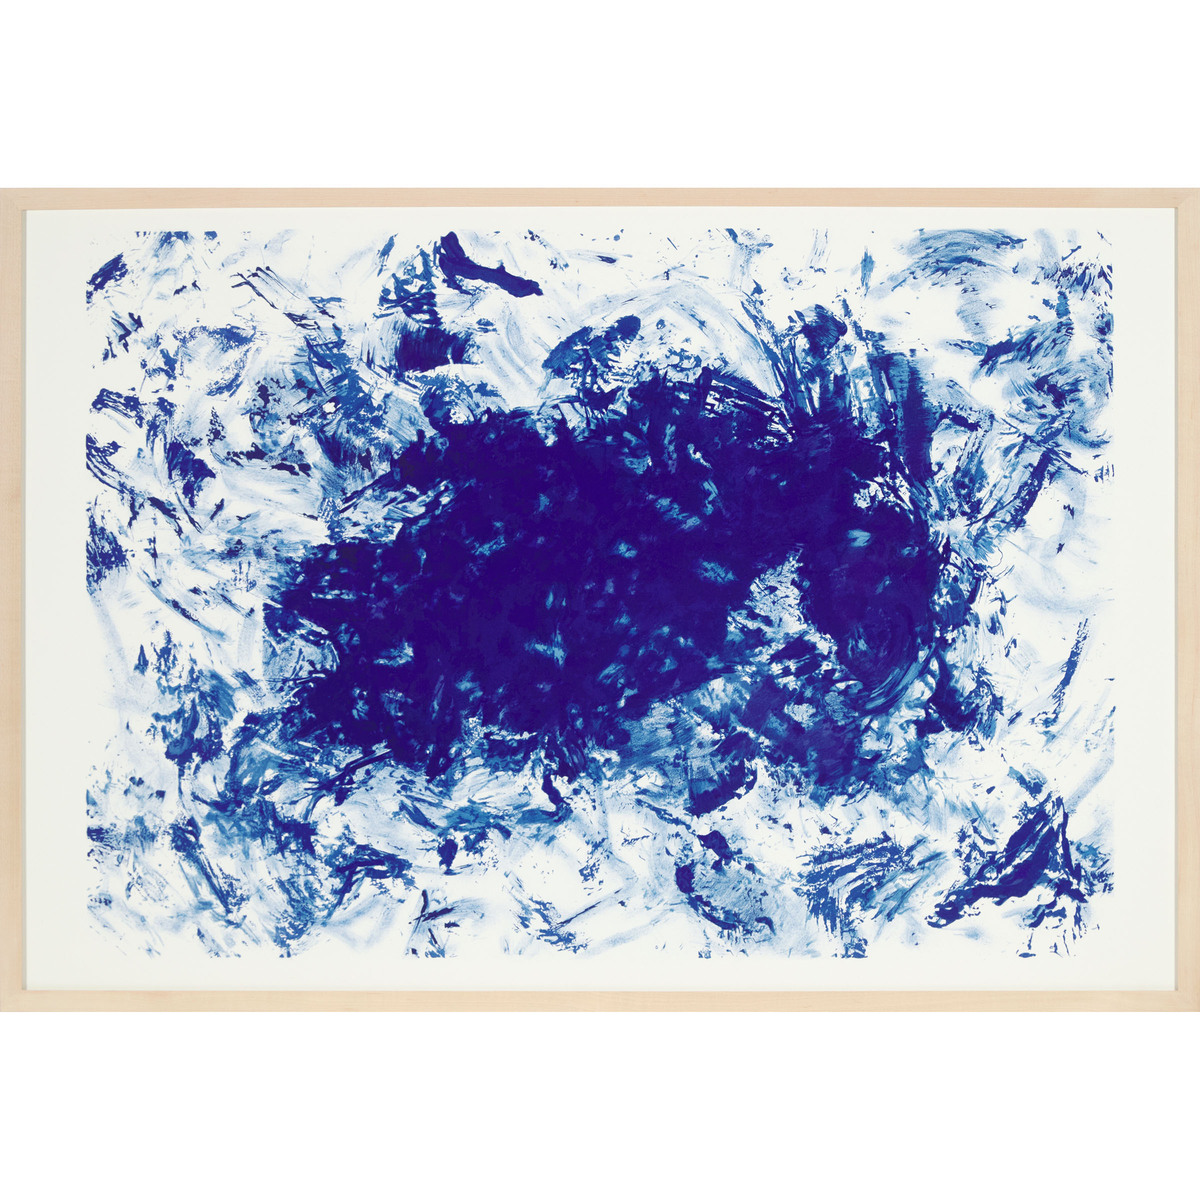 Yves Klein (1928-1962), ANTHROPOMETRIE, ANT 83, 1960-2001, signed in ink by Madame Rotraut Klein-Moq - Image 2 of 4